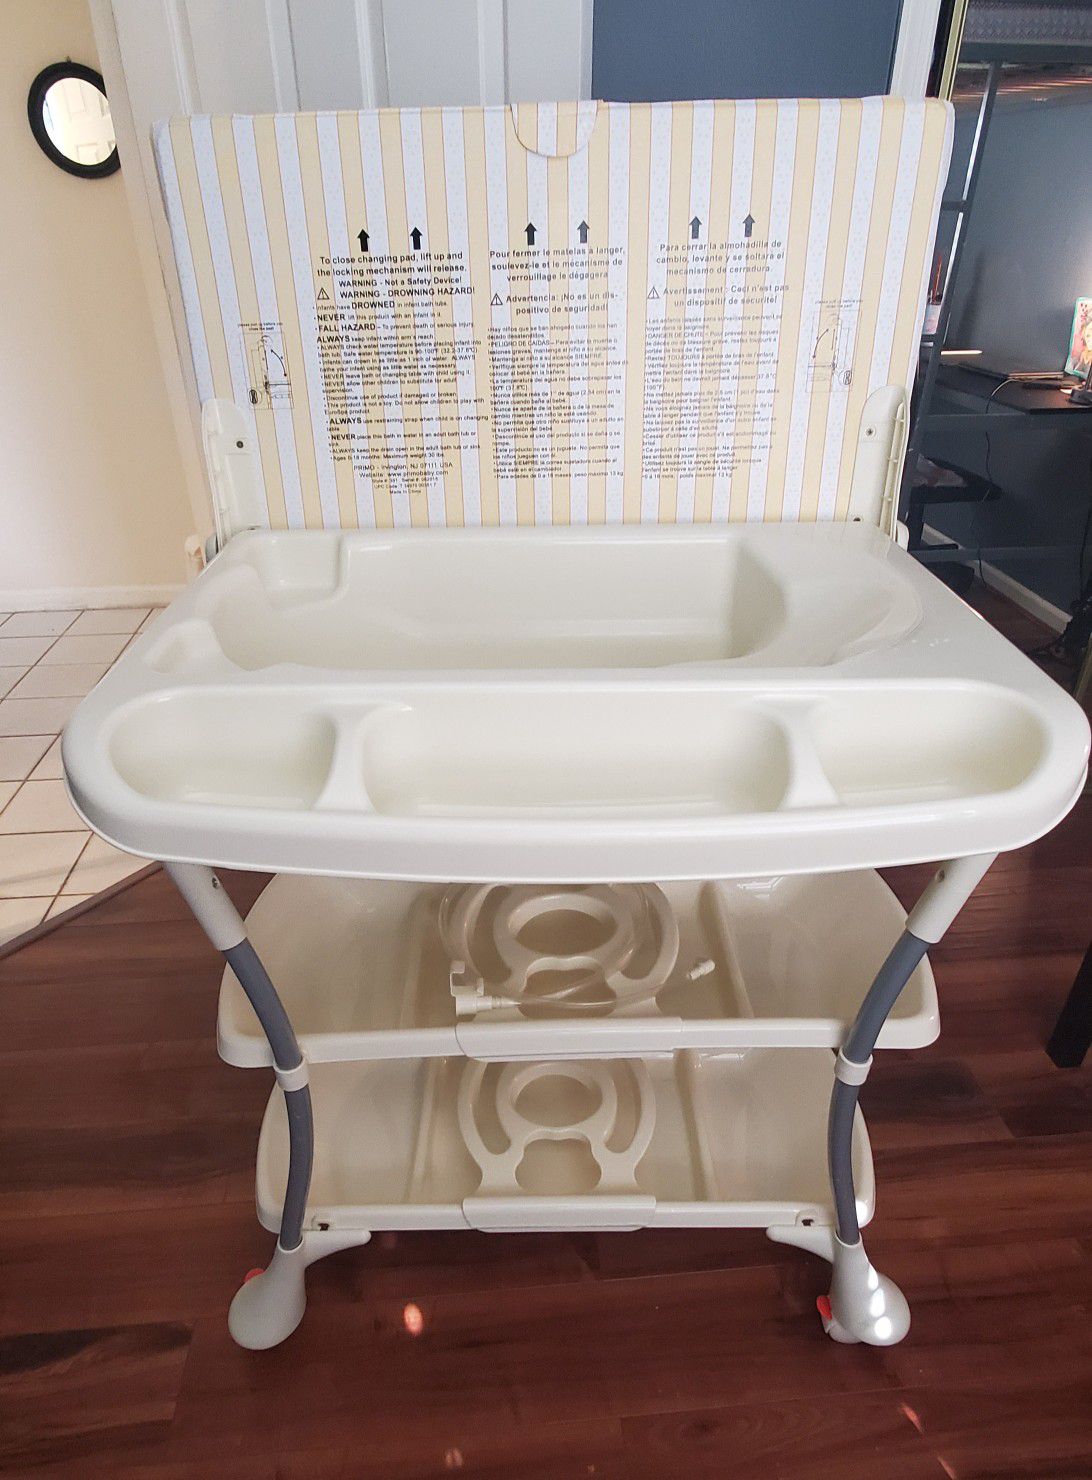 Baby bathtub and Changing table.